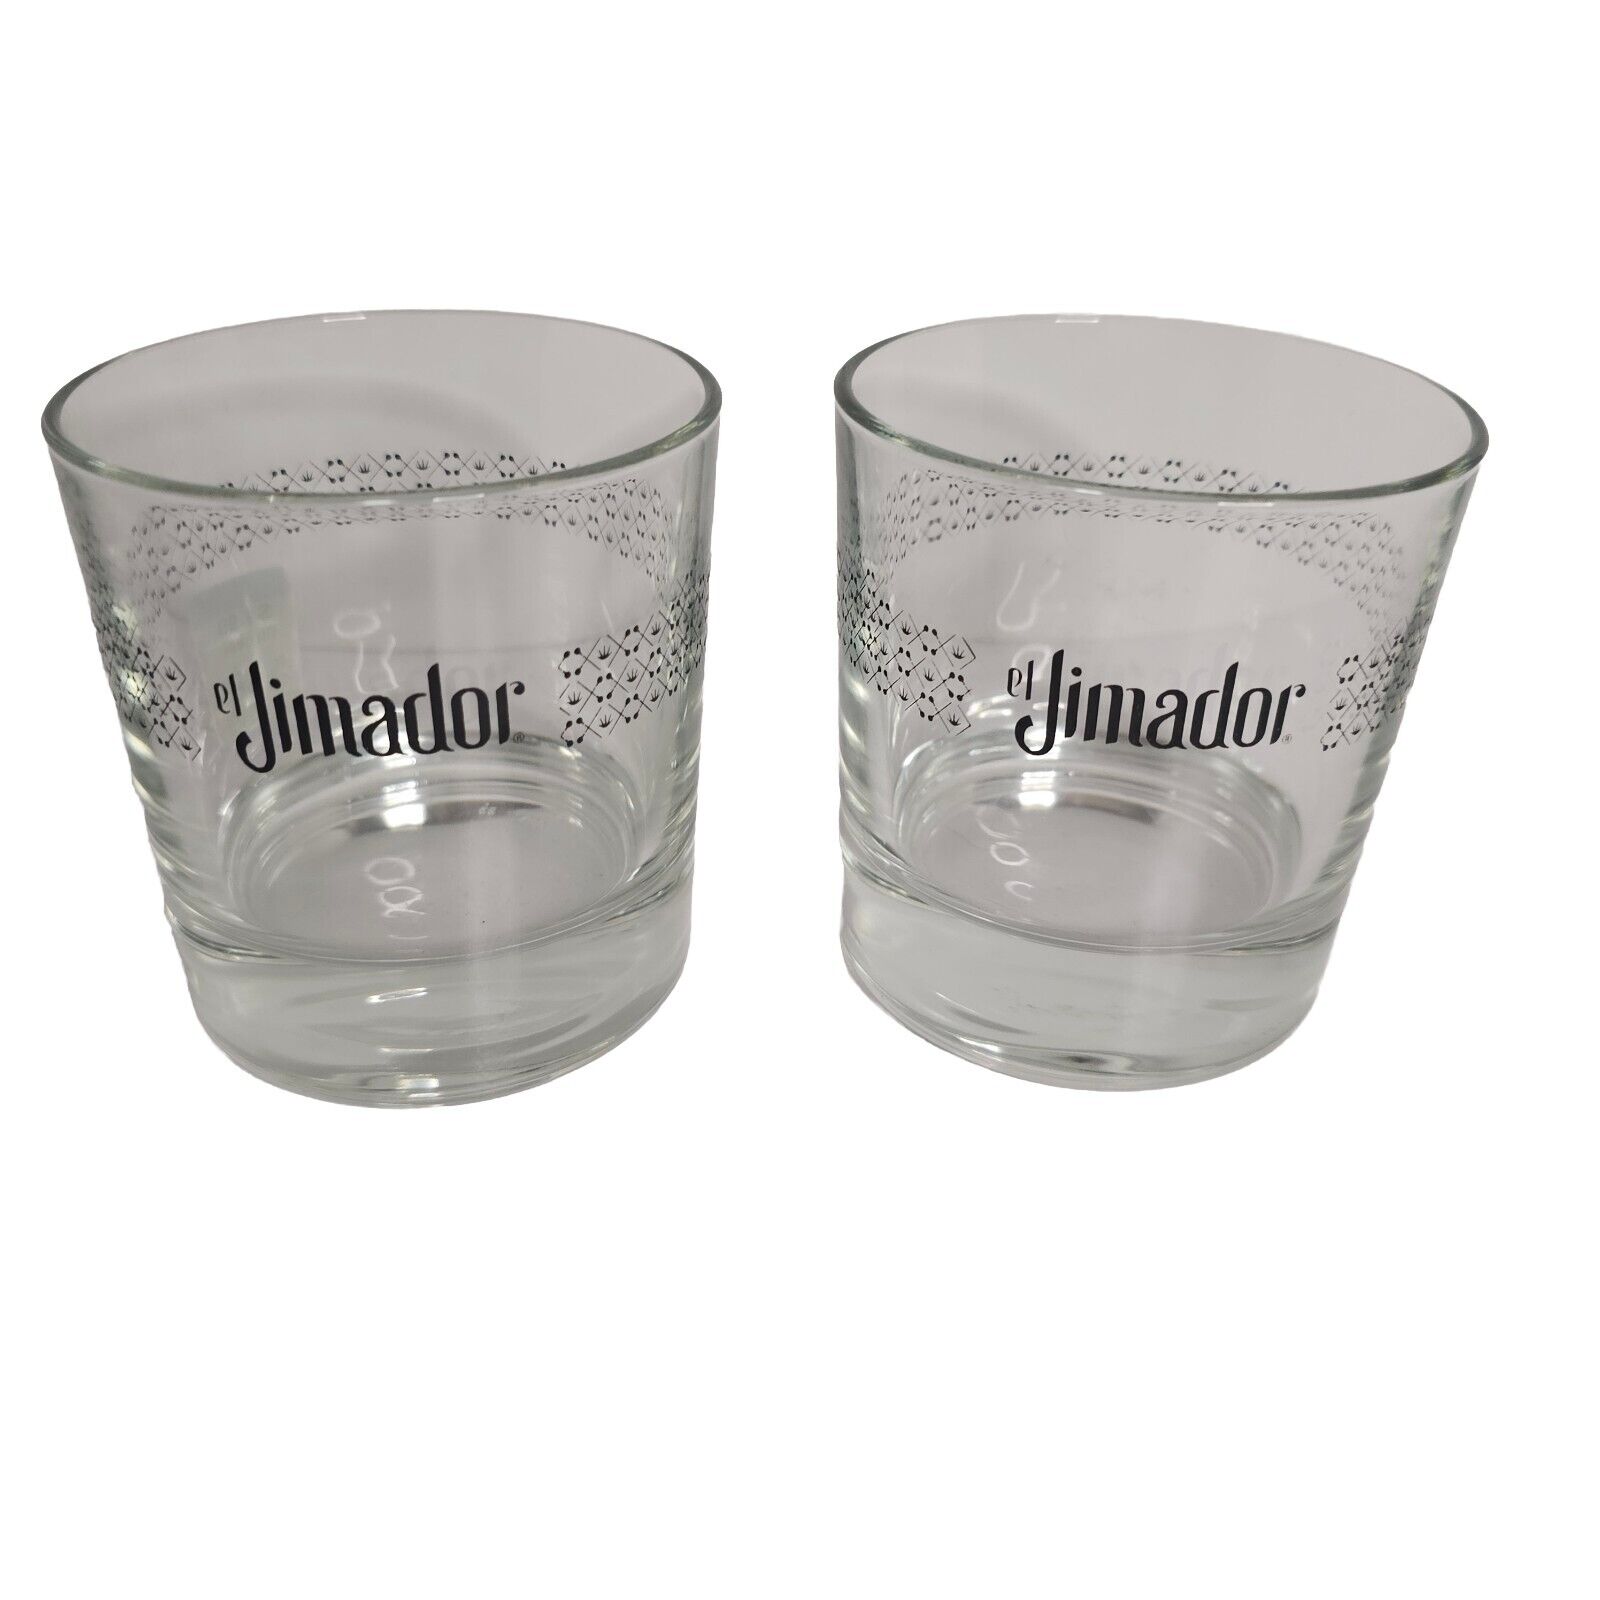  EL JIMADOR TEQUILA Glasses Pair MADE IN ITALY Barware Cocktail 